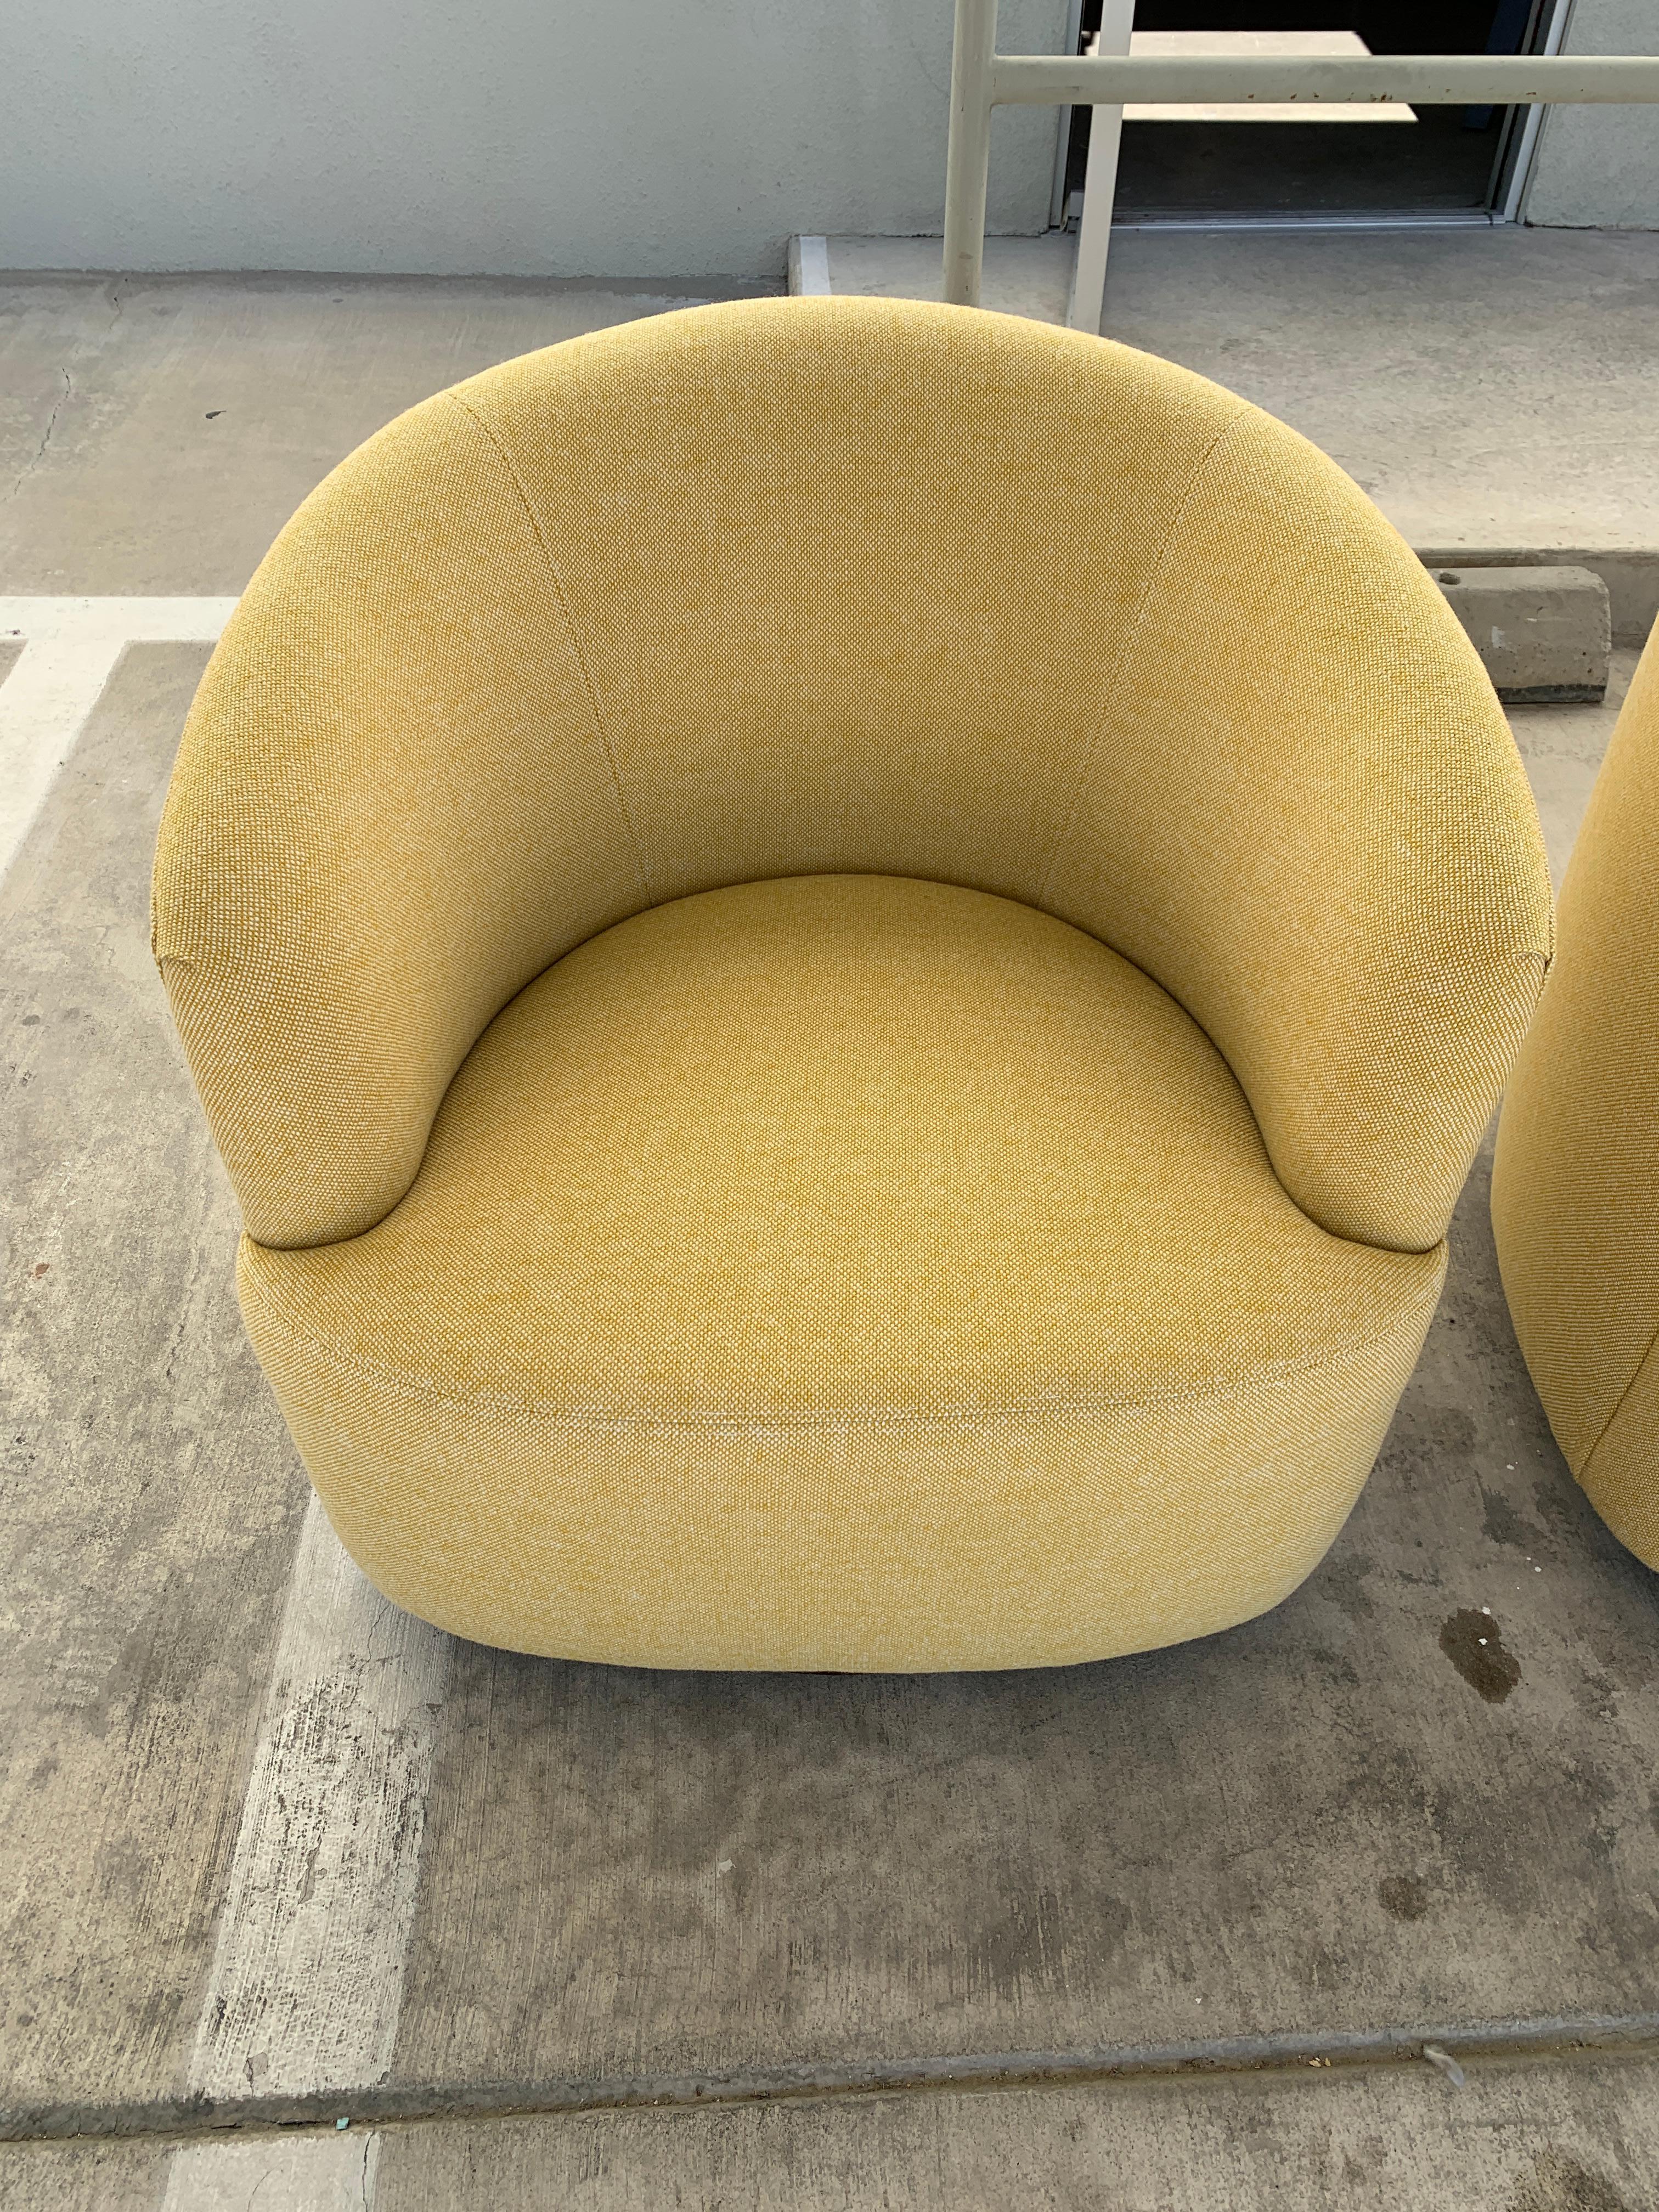 A pretty pair of vintage barrel chairs that swivel on wood circular bases. They have been completely redone and re-upholstered. The lines have been made cleaner and more modern. A beautiful and comfortable pair of chairs.